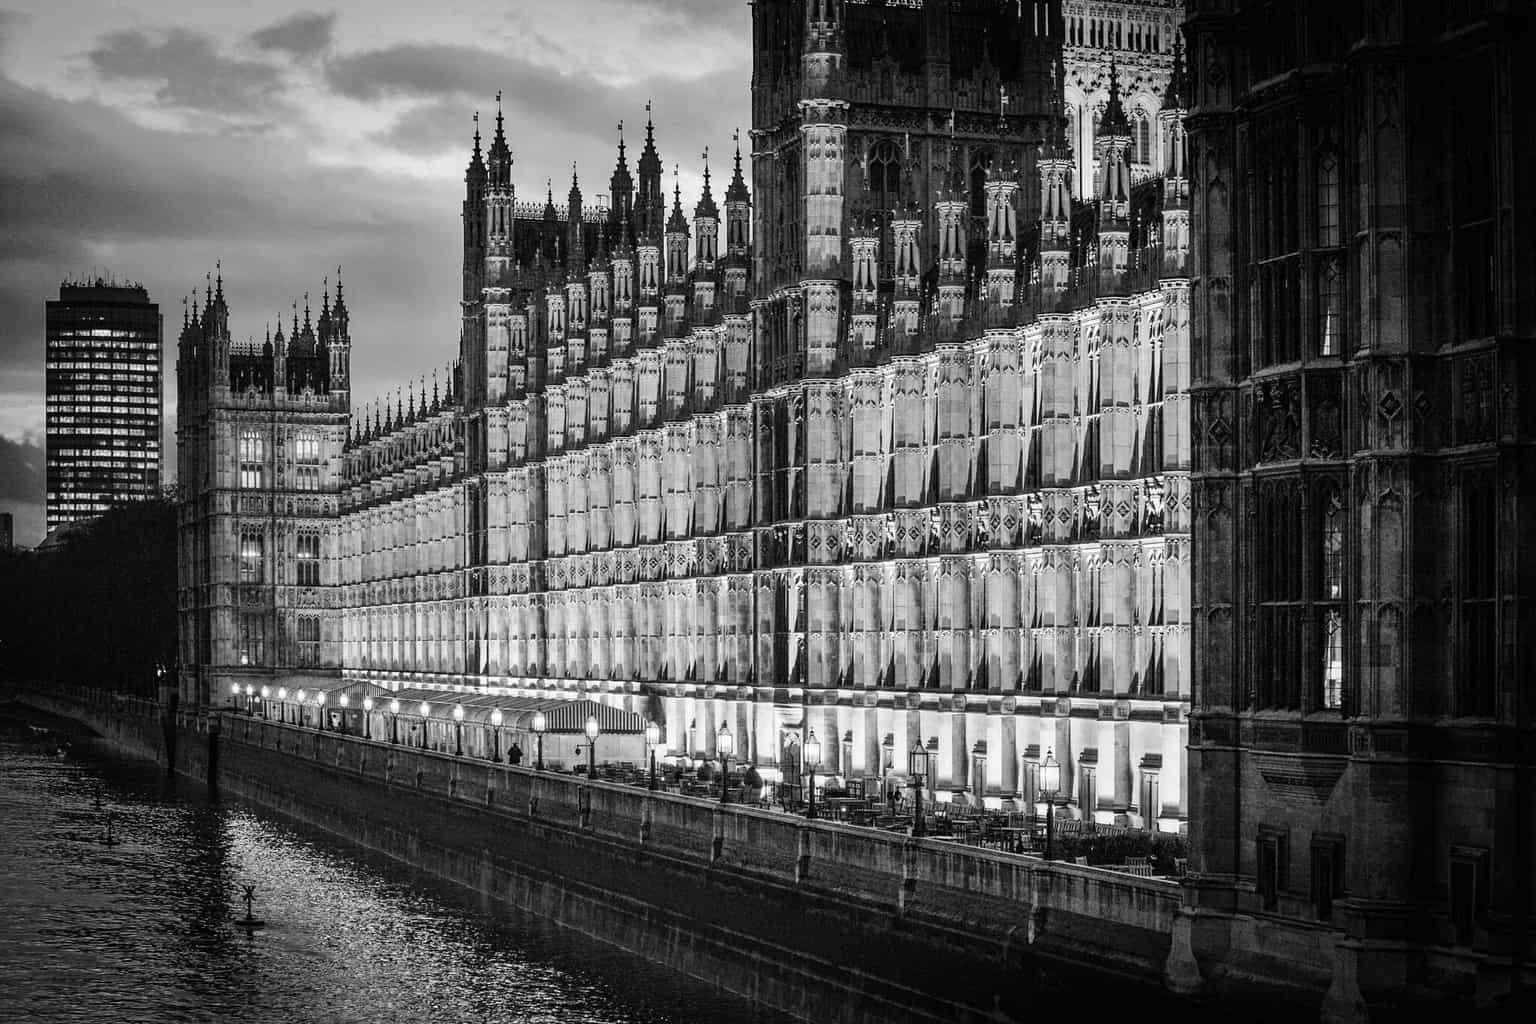  Palace of Westminster, London 